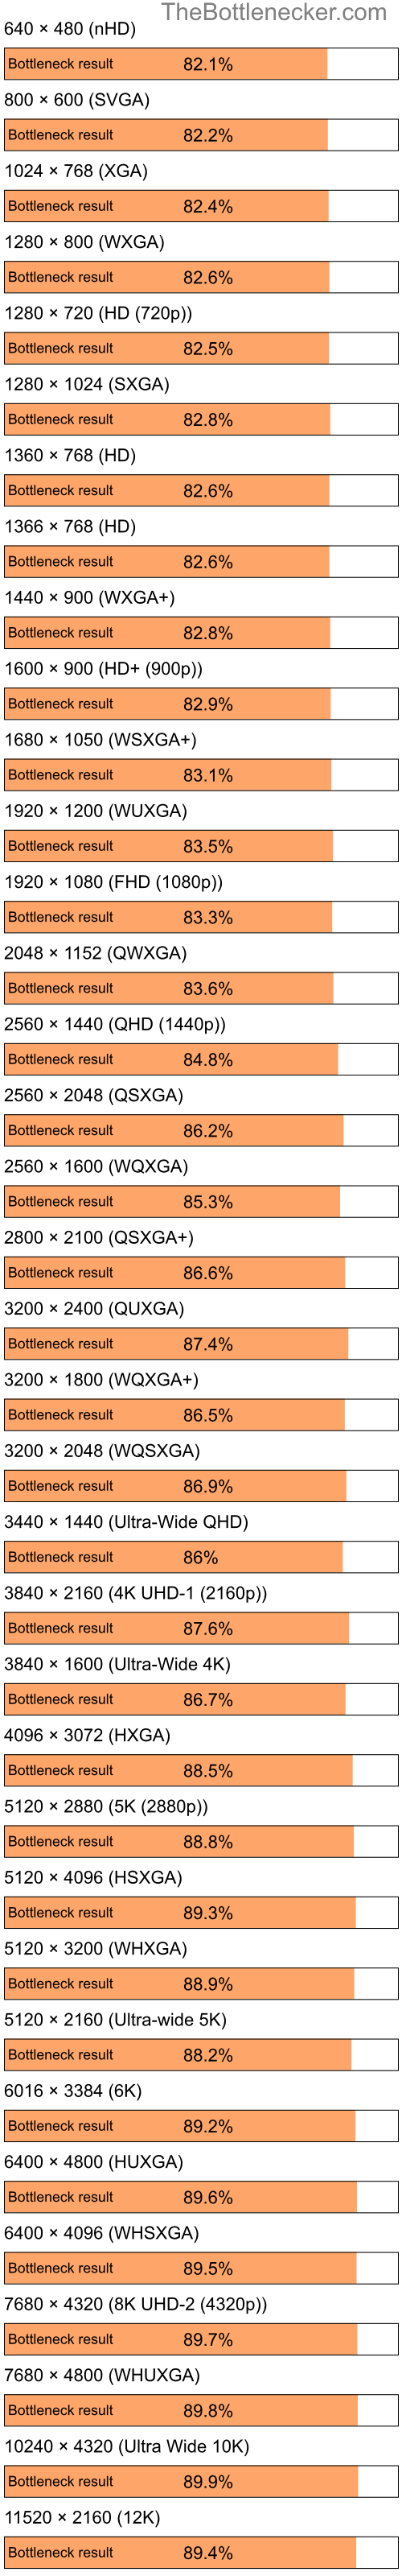 Bottleneck results by resolution for Intel Pentium 4 and NVIDIA GeForce 7050 in Graphic Card Intense Tasks